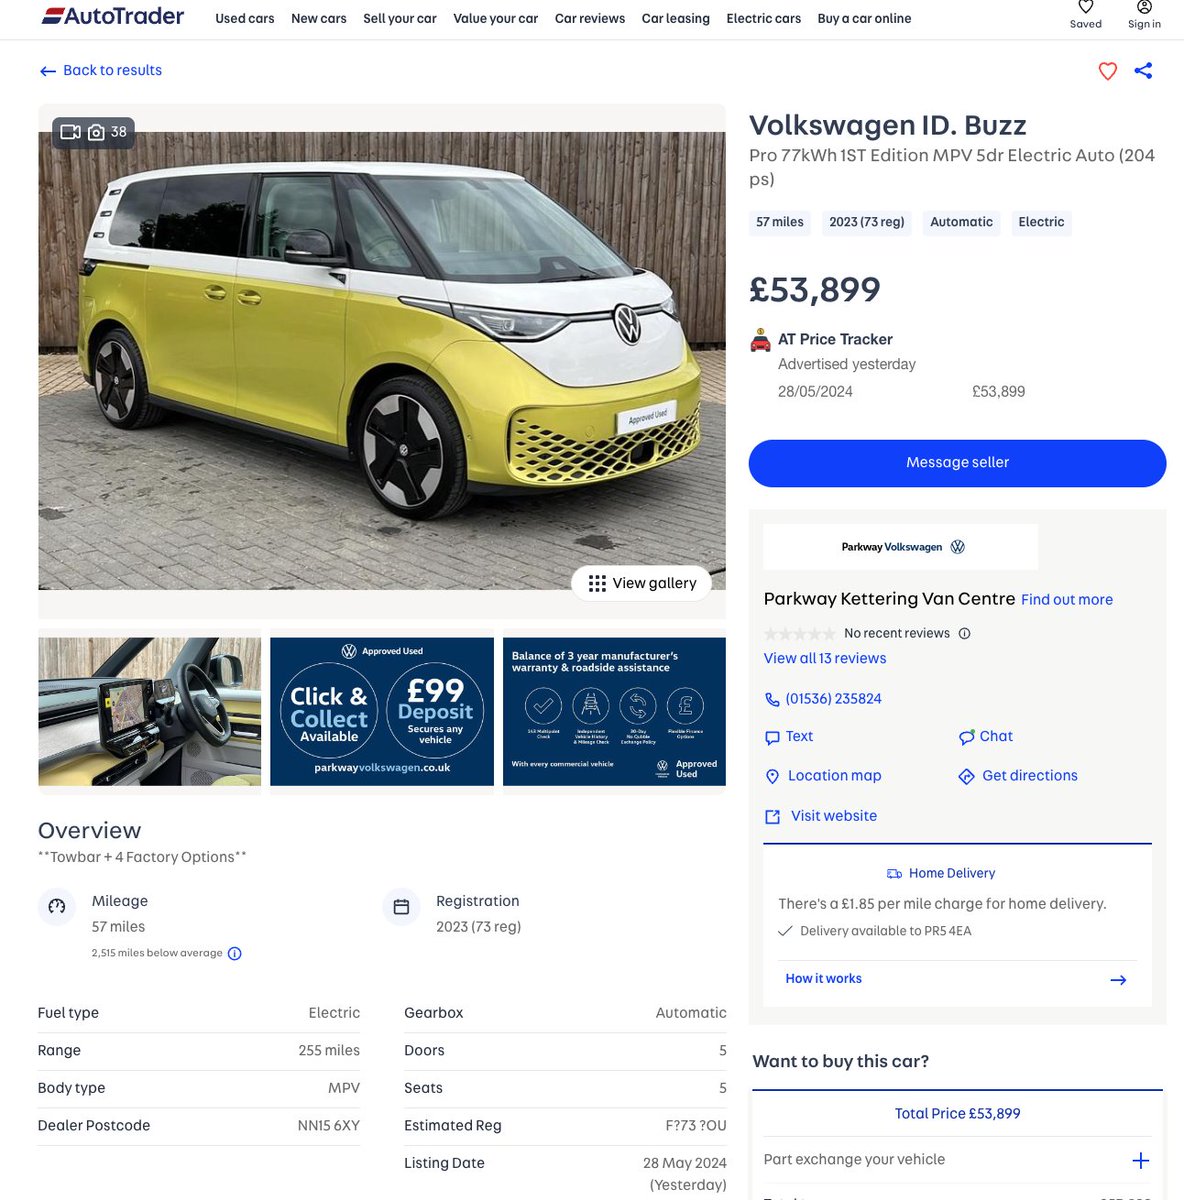 Volkswagen ID. Buzz
Pro 77kWh 1ST Edition MPV

I wonder what edition they will be on before they have sold all the Pre Registered  First Editions